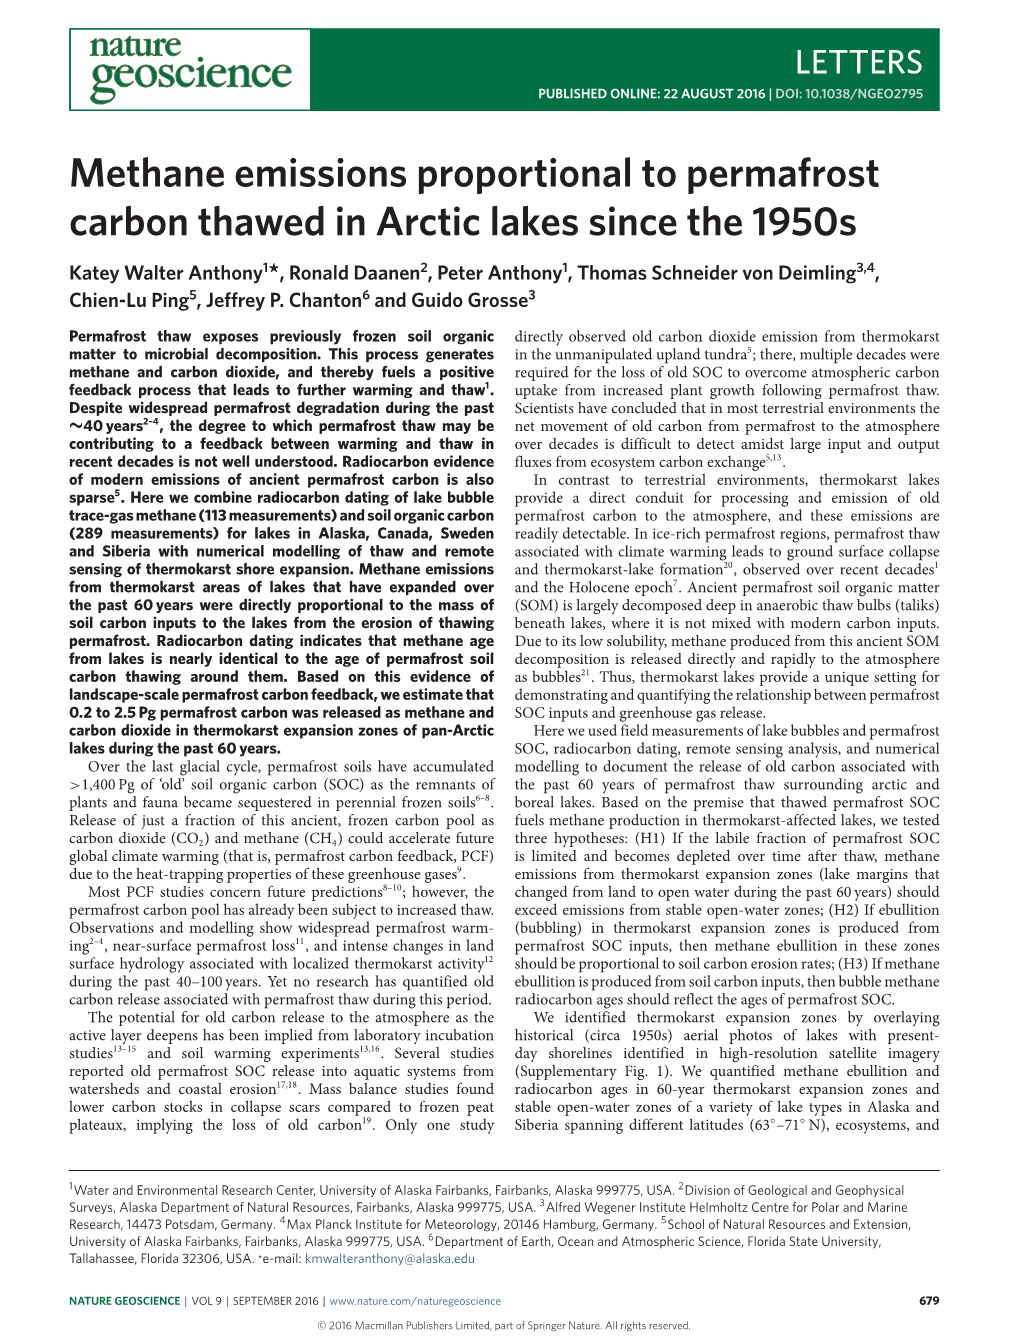 Methane Emissions Proportional to Permafrost Carbon Thawed in Arctic